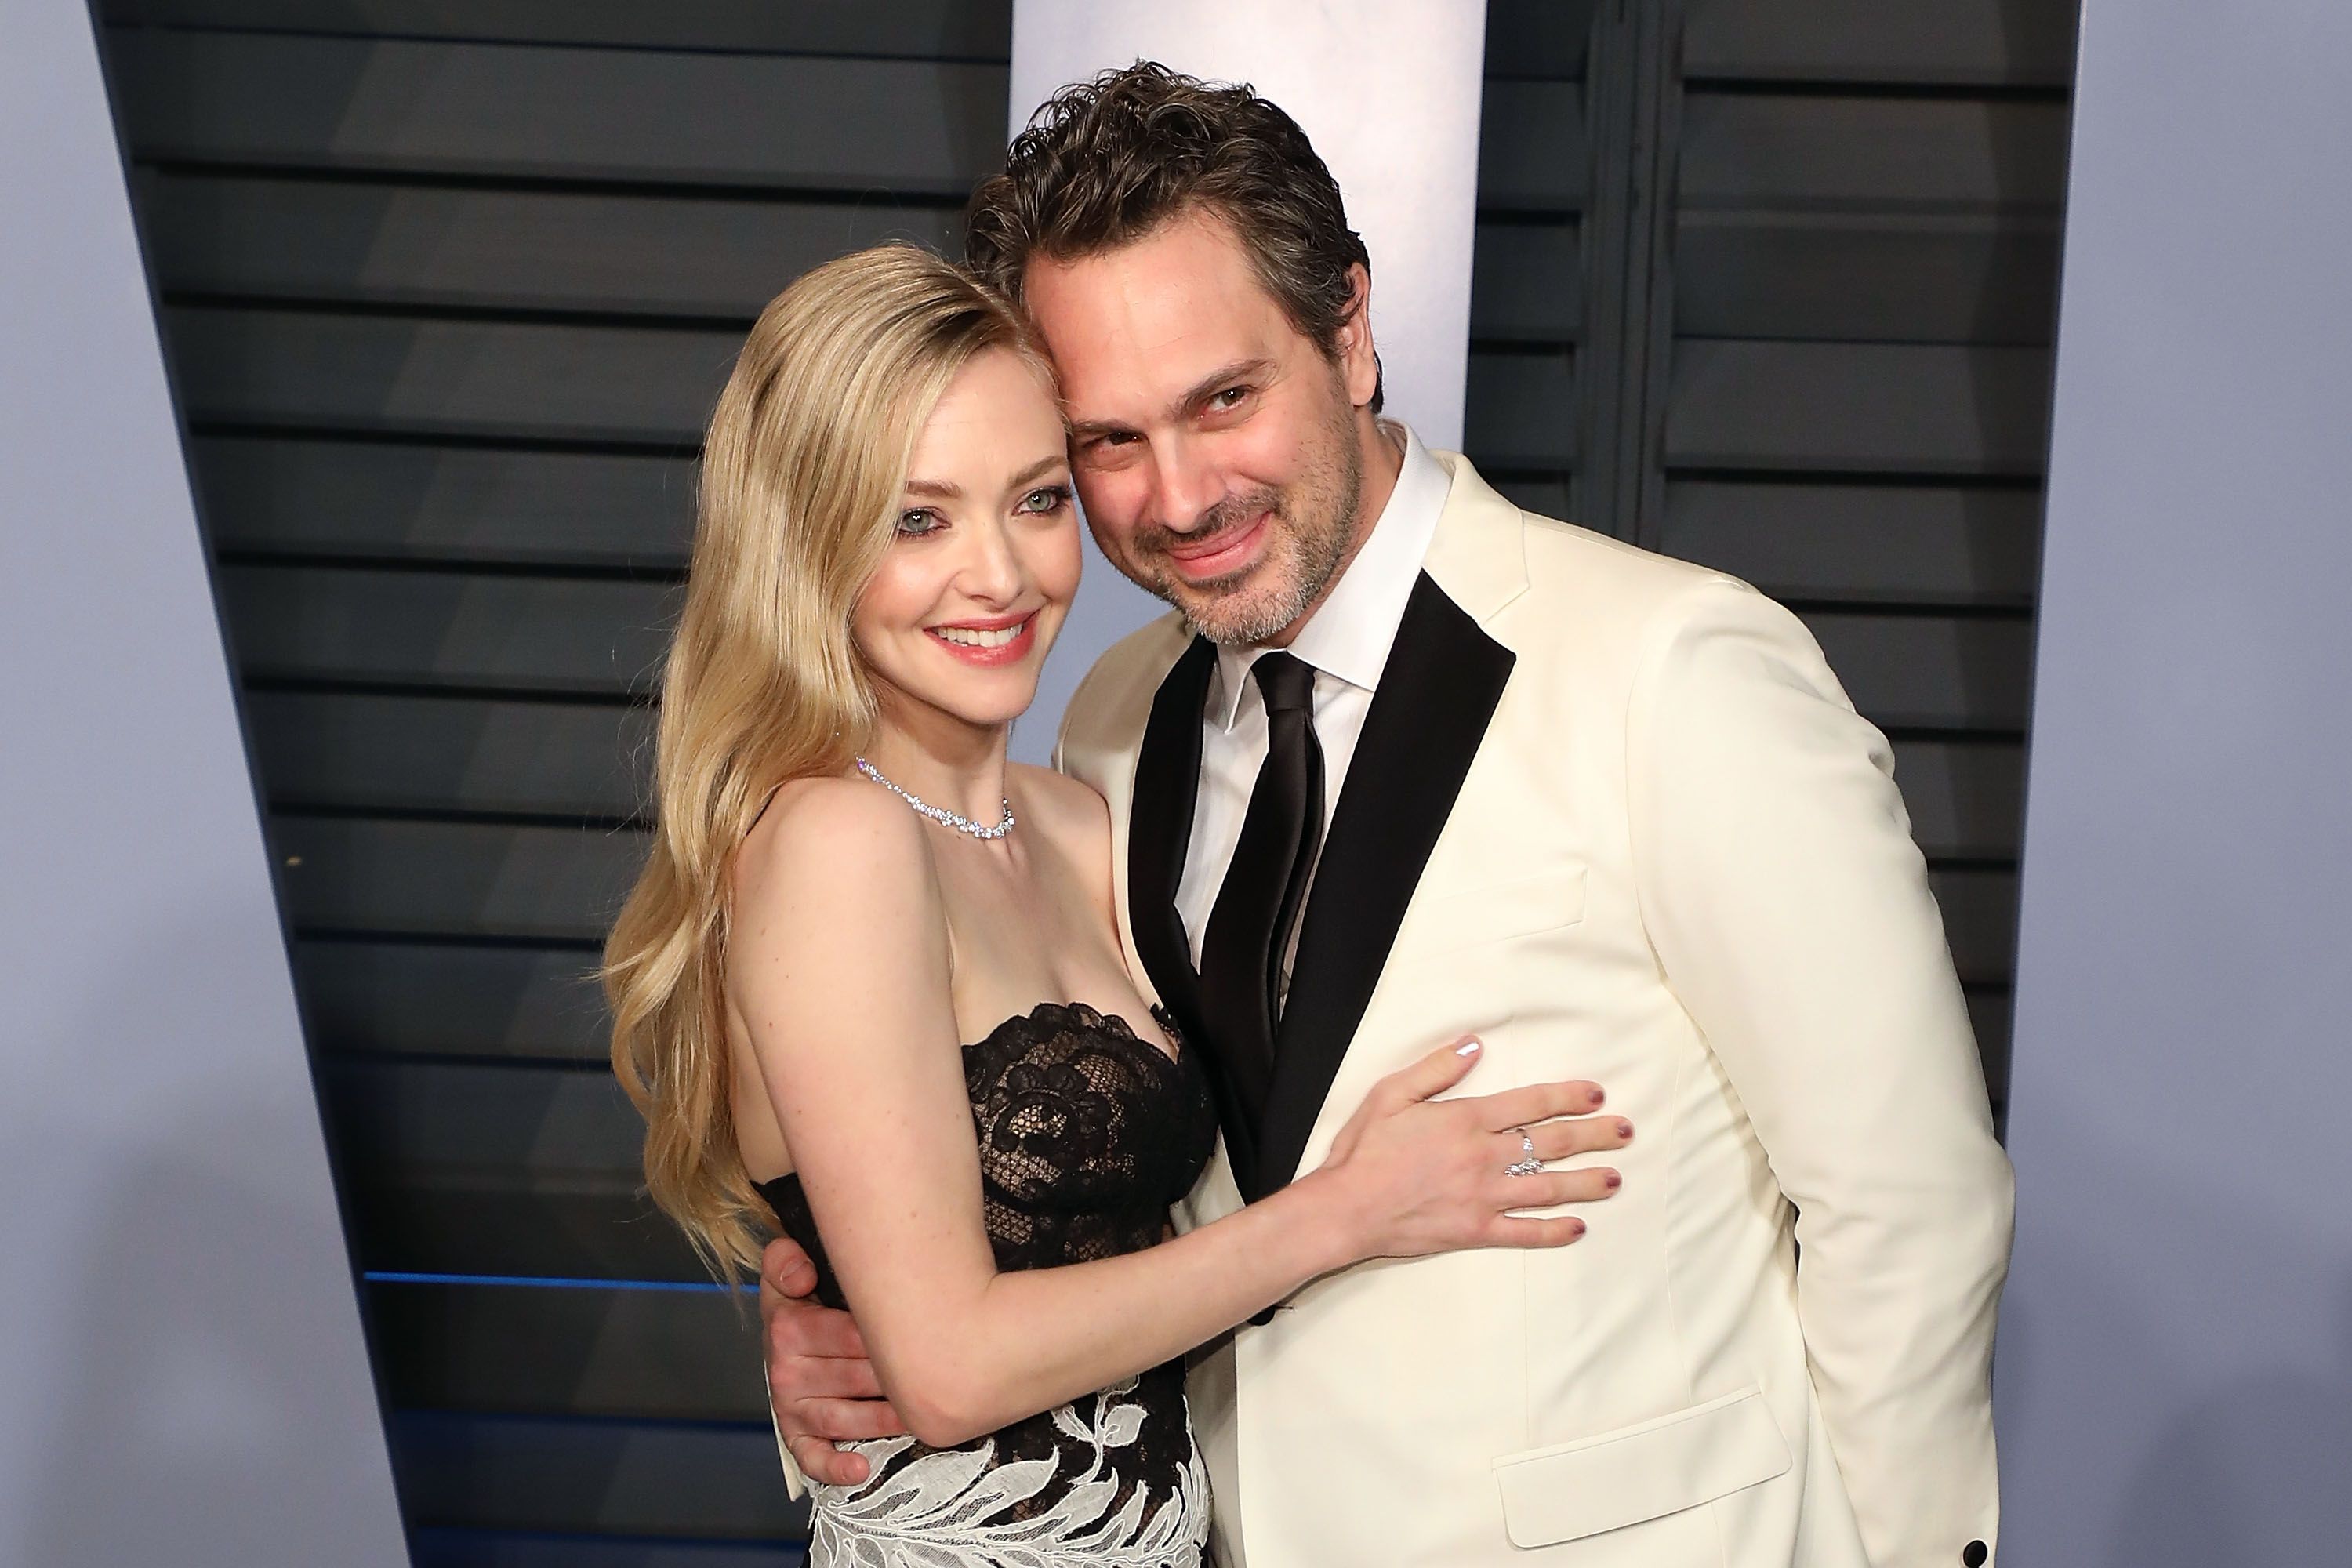 Amanda Seyfried and Thomas Sadoski during the 2018 Vanity Fair Oscar Party Hosted By Radhika Jones - Arrivals at Wallis Annenberg Center for the Performing Arts on March 4, 2018 in Beverly Hills, CA. | Source: Getty Images